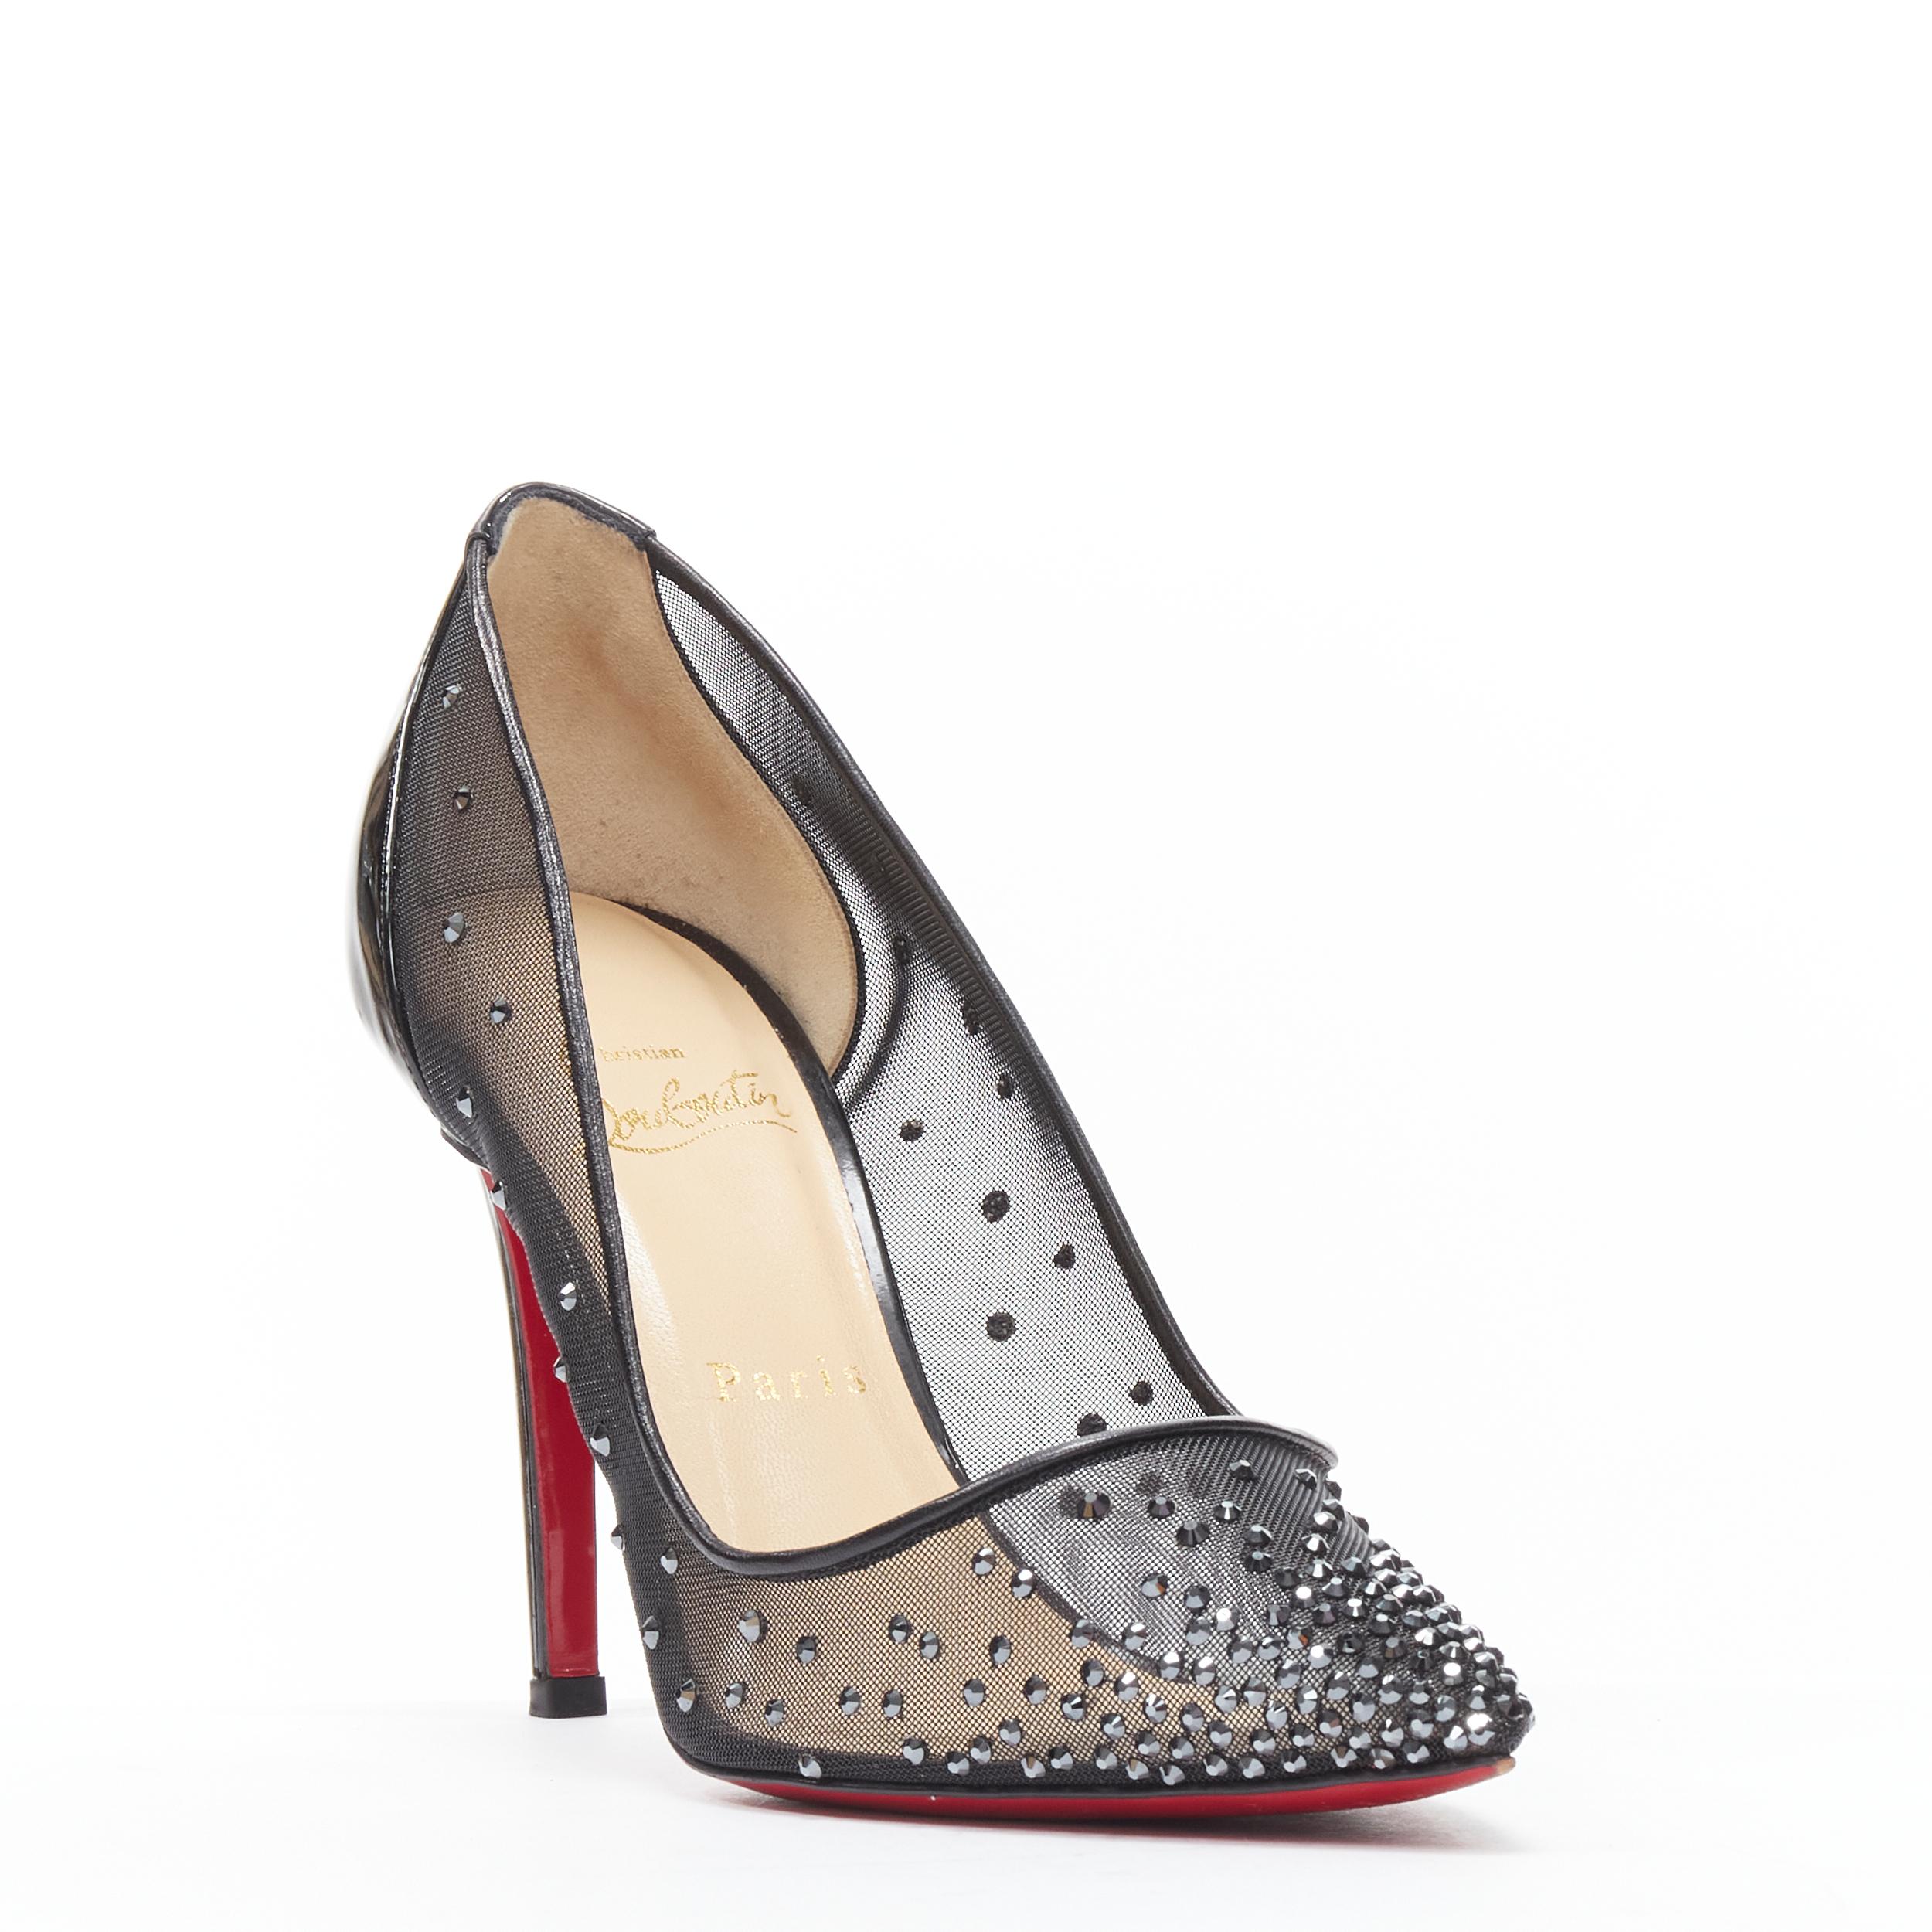 CHRISTIAN LOUBOUTIN Follies Strass 100 black crystal sheer mesh pigalle EU38 
Reference: TGAS/B01511 
Brand: Christian Louboutin 
Designer: Christian Louboutin 
Model: Follies Strass 
Material: Mesh 
Color: Black 
Pattern: Solid 
Extra Detail: Sheer